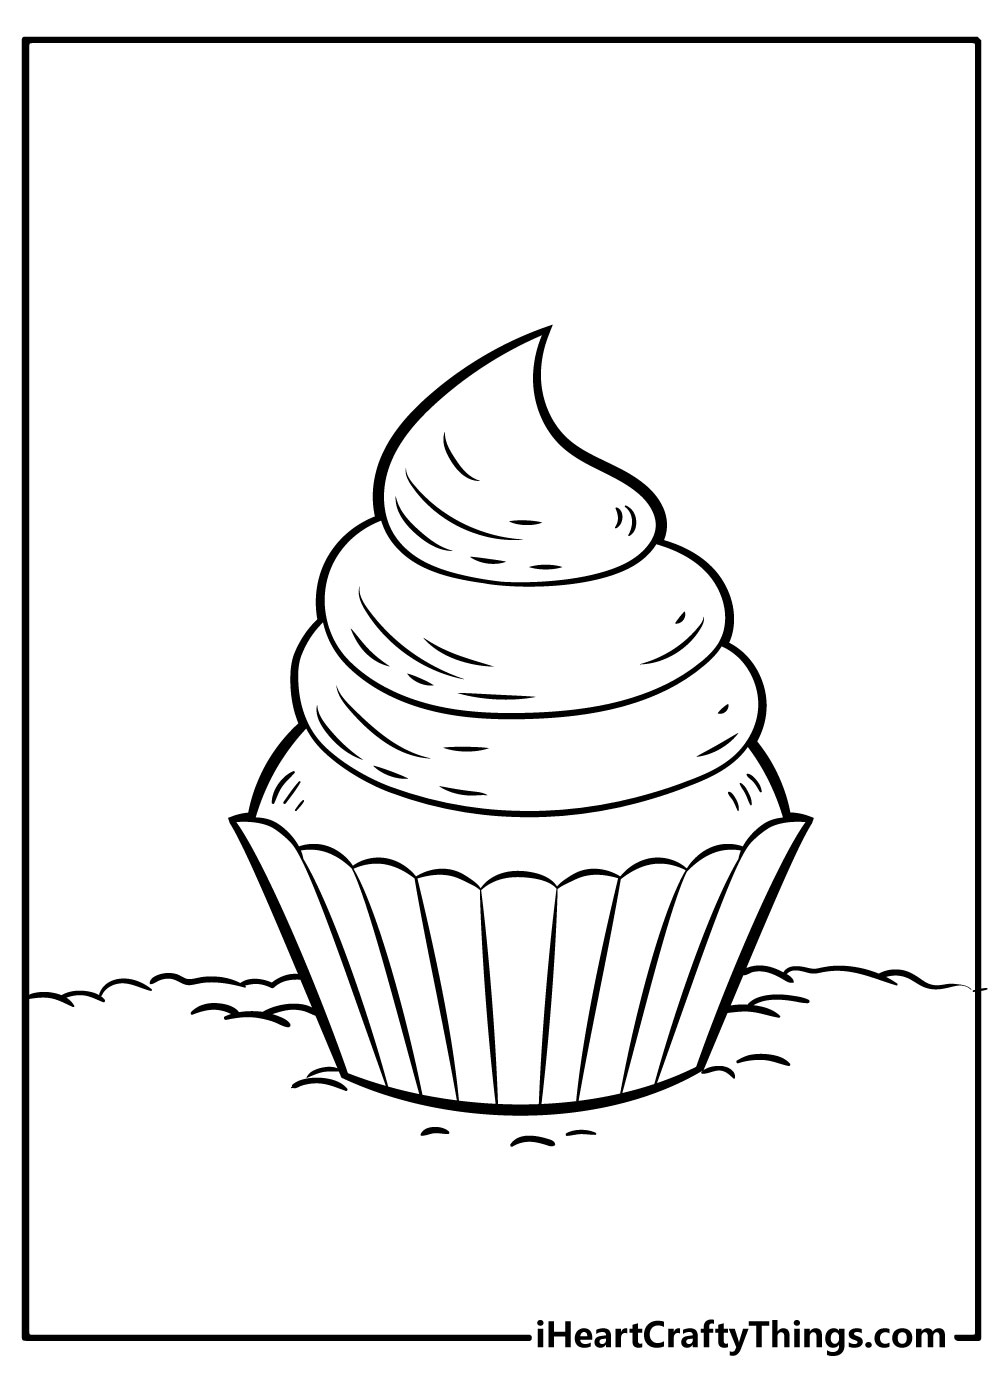 Cupcake Coloring Pages free download